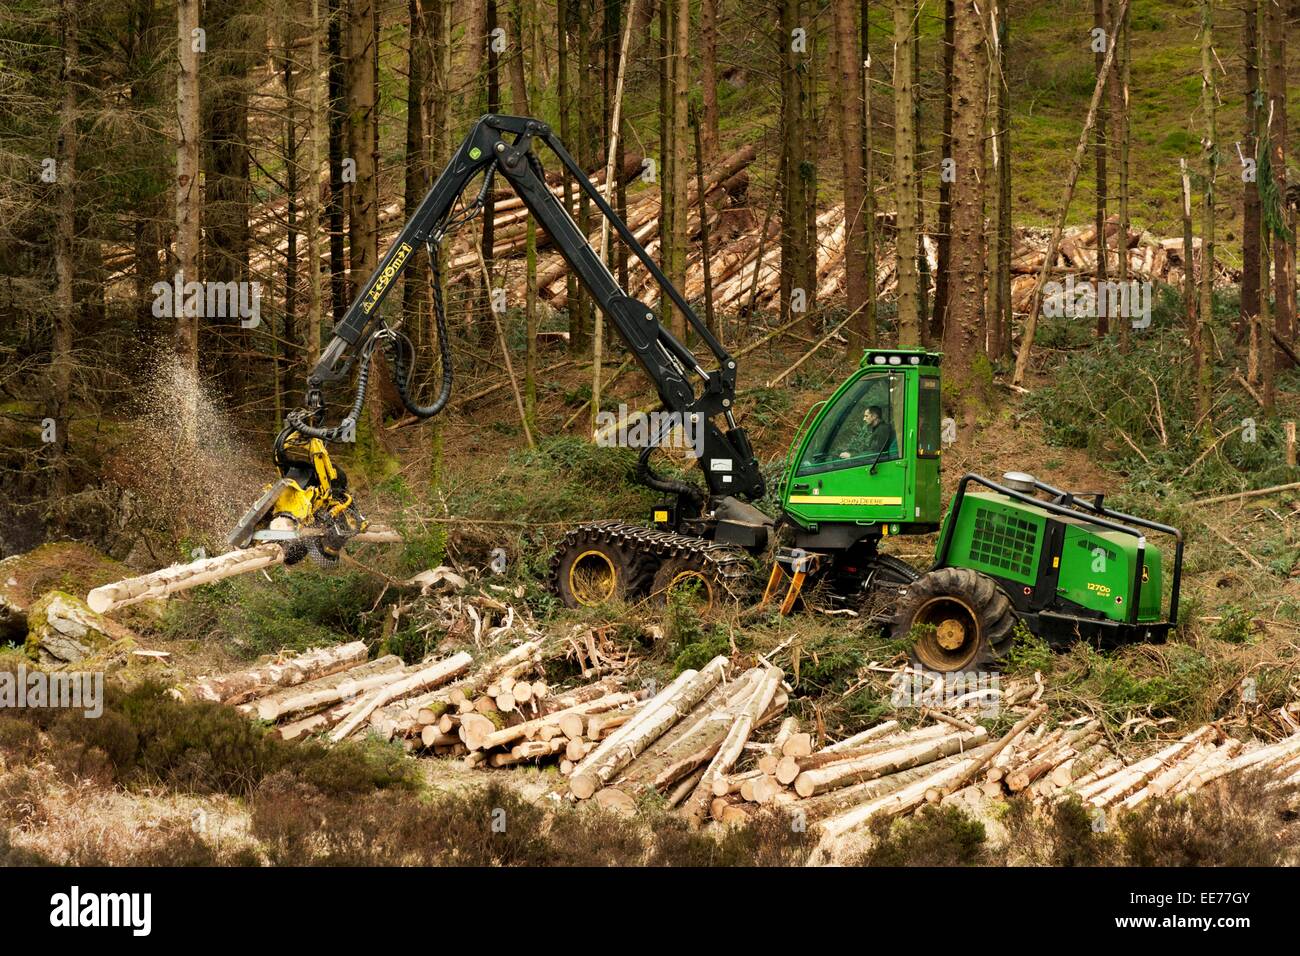 John Deere 1270D Harvester felling timber in a forest in western Scotland.  An example of machinery for harvesting softwood. Stock Photo